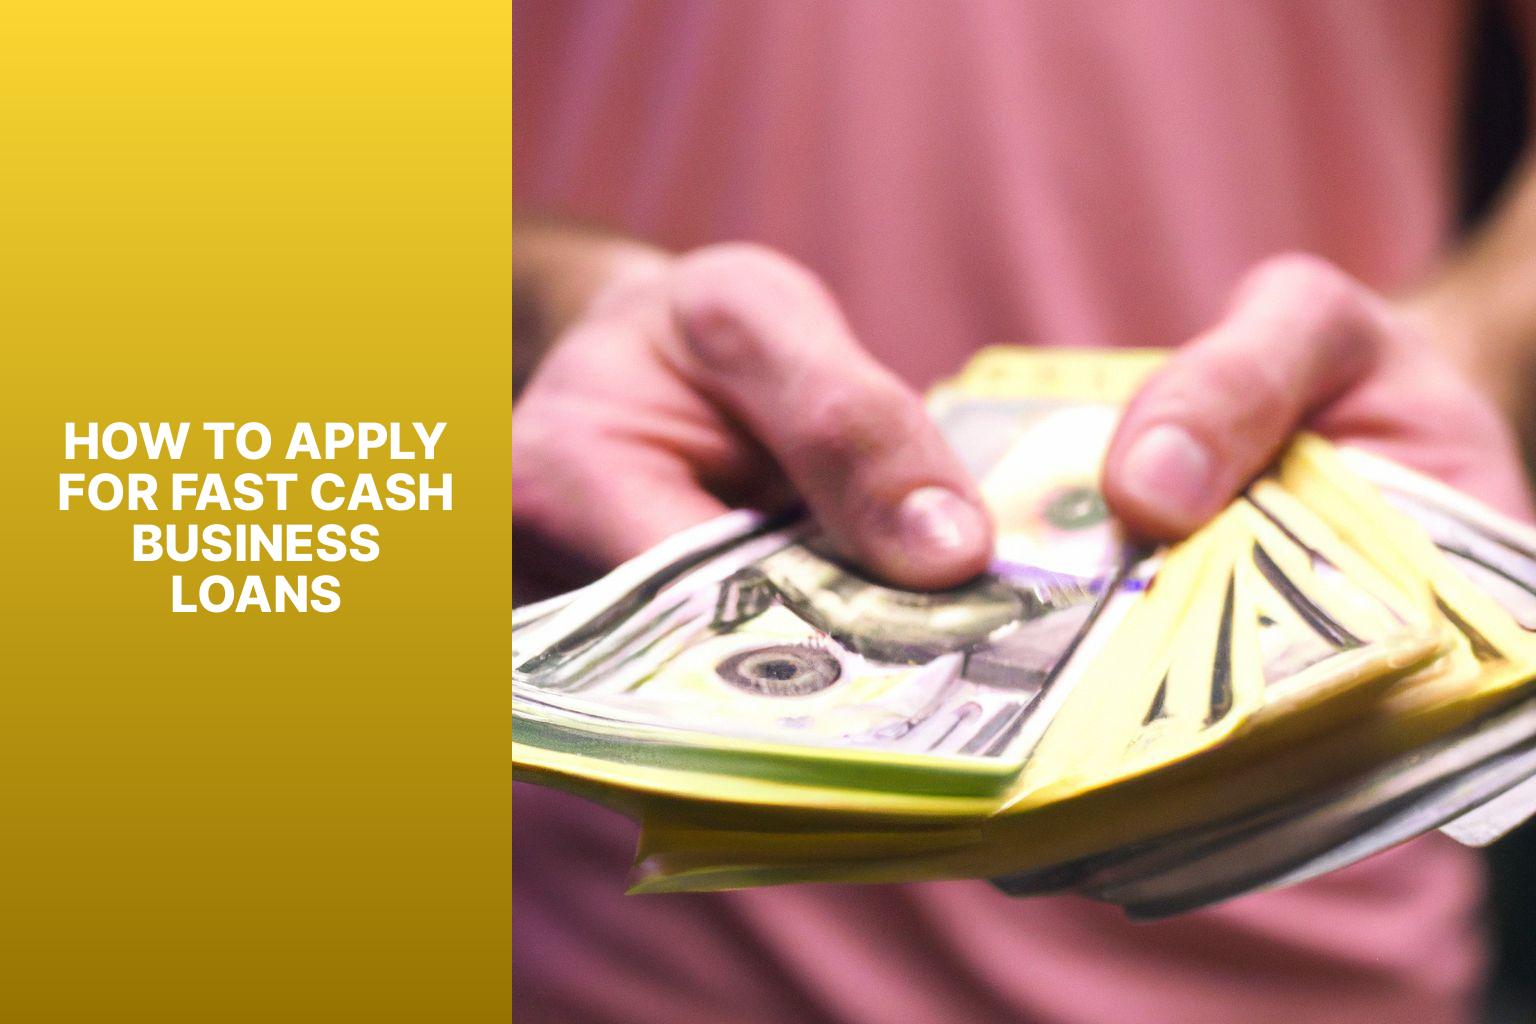 How to Apply for Fast Cash Business Loans - Emergency Capital: A Deep Dive into Fast Cash Business Loans 